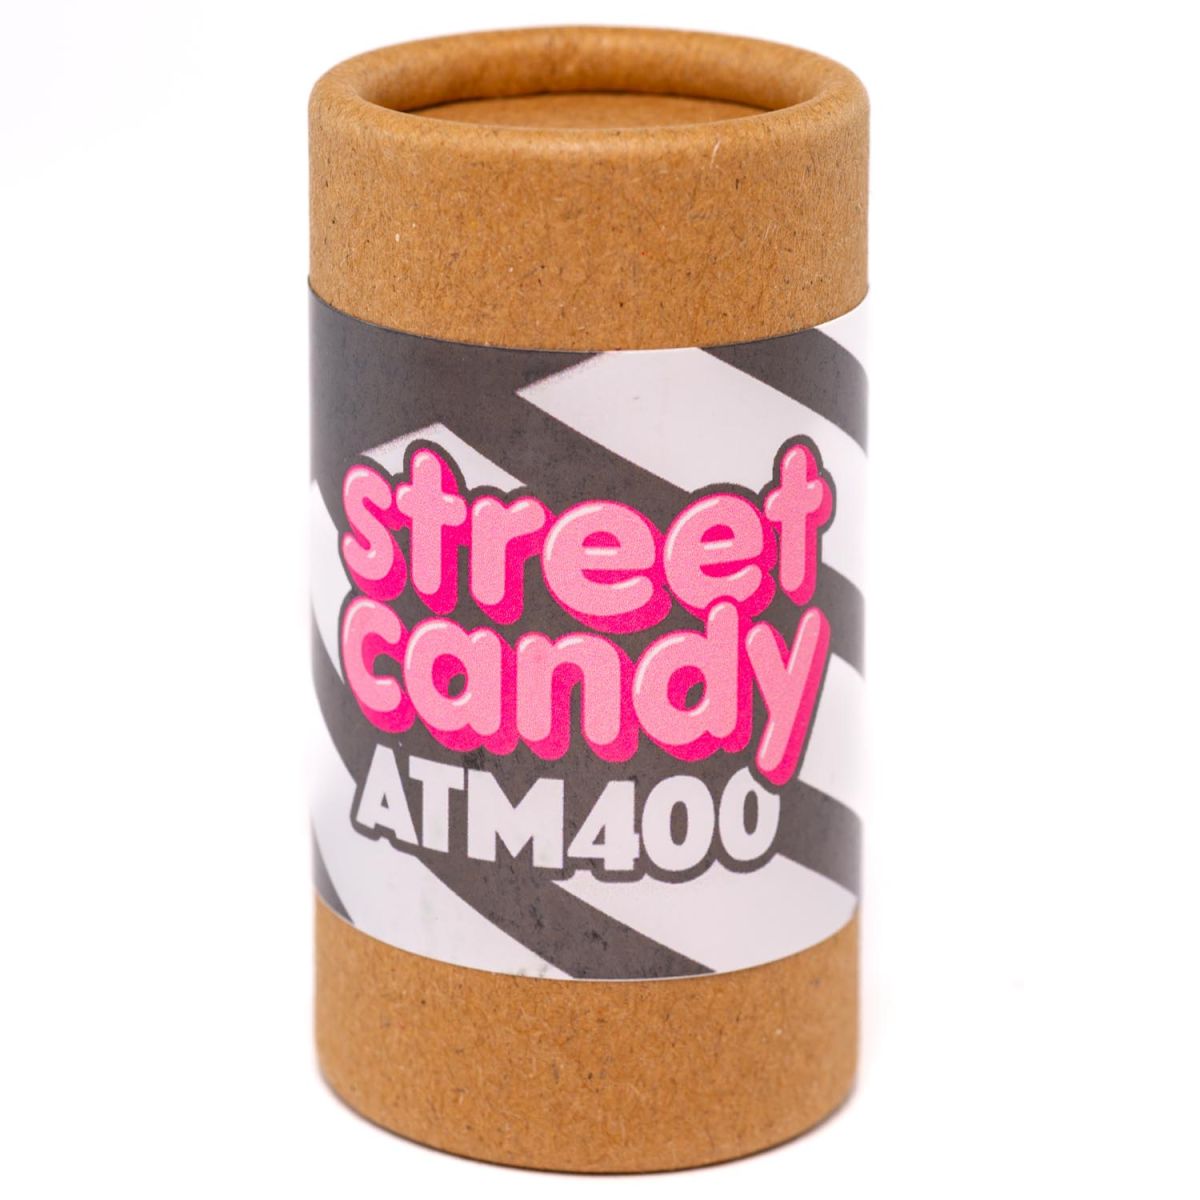 Street Candy ATM400 136-35